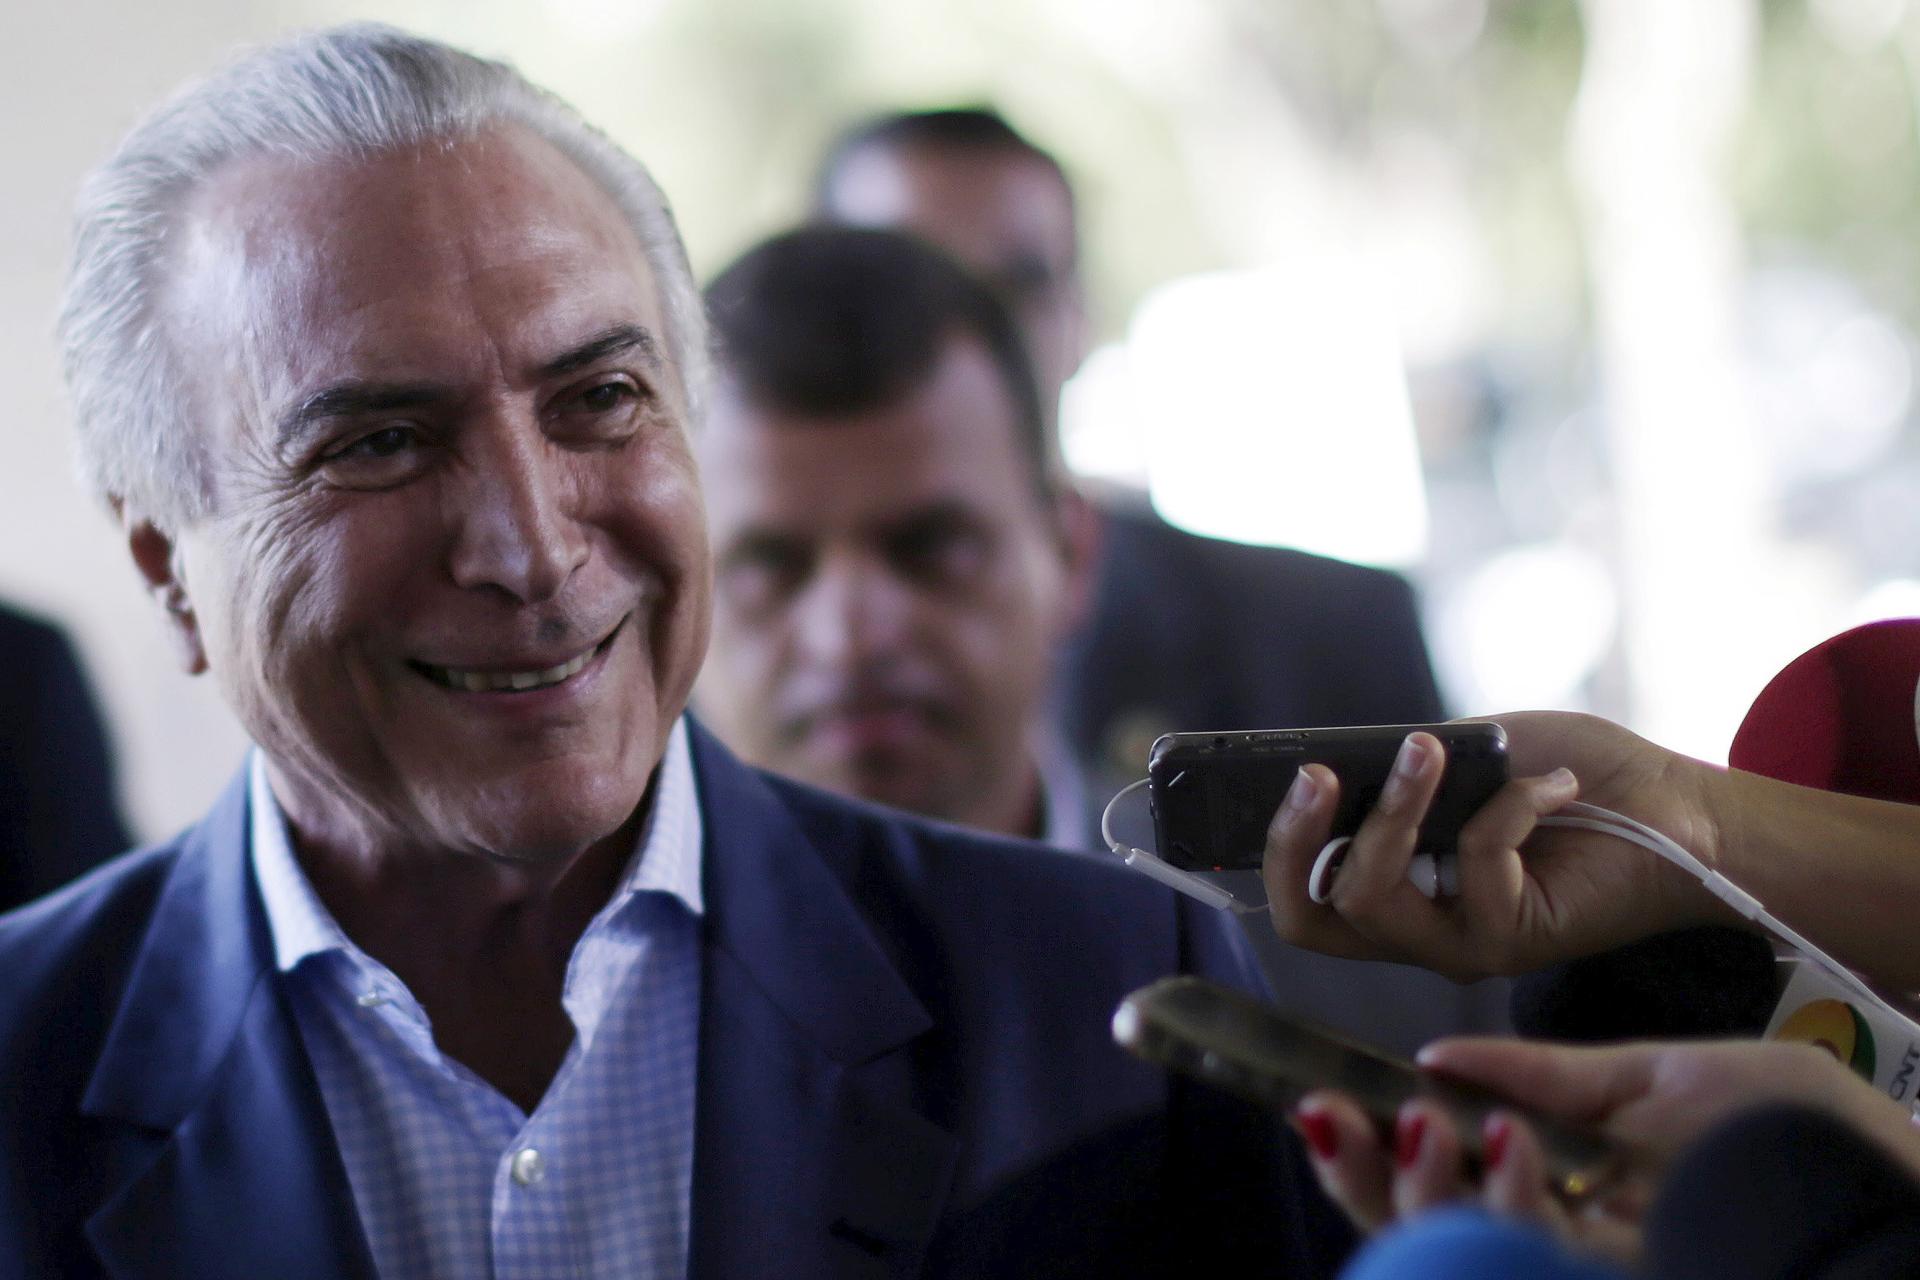 Michel Temer is Brazil's acting president. Will Brazilians trust that smile?